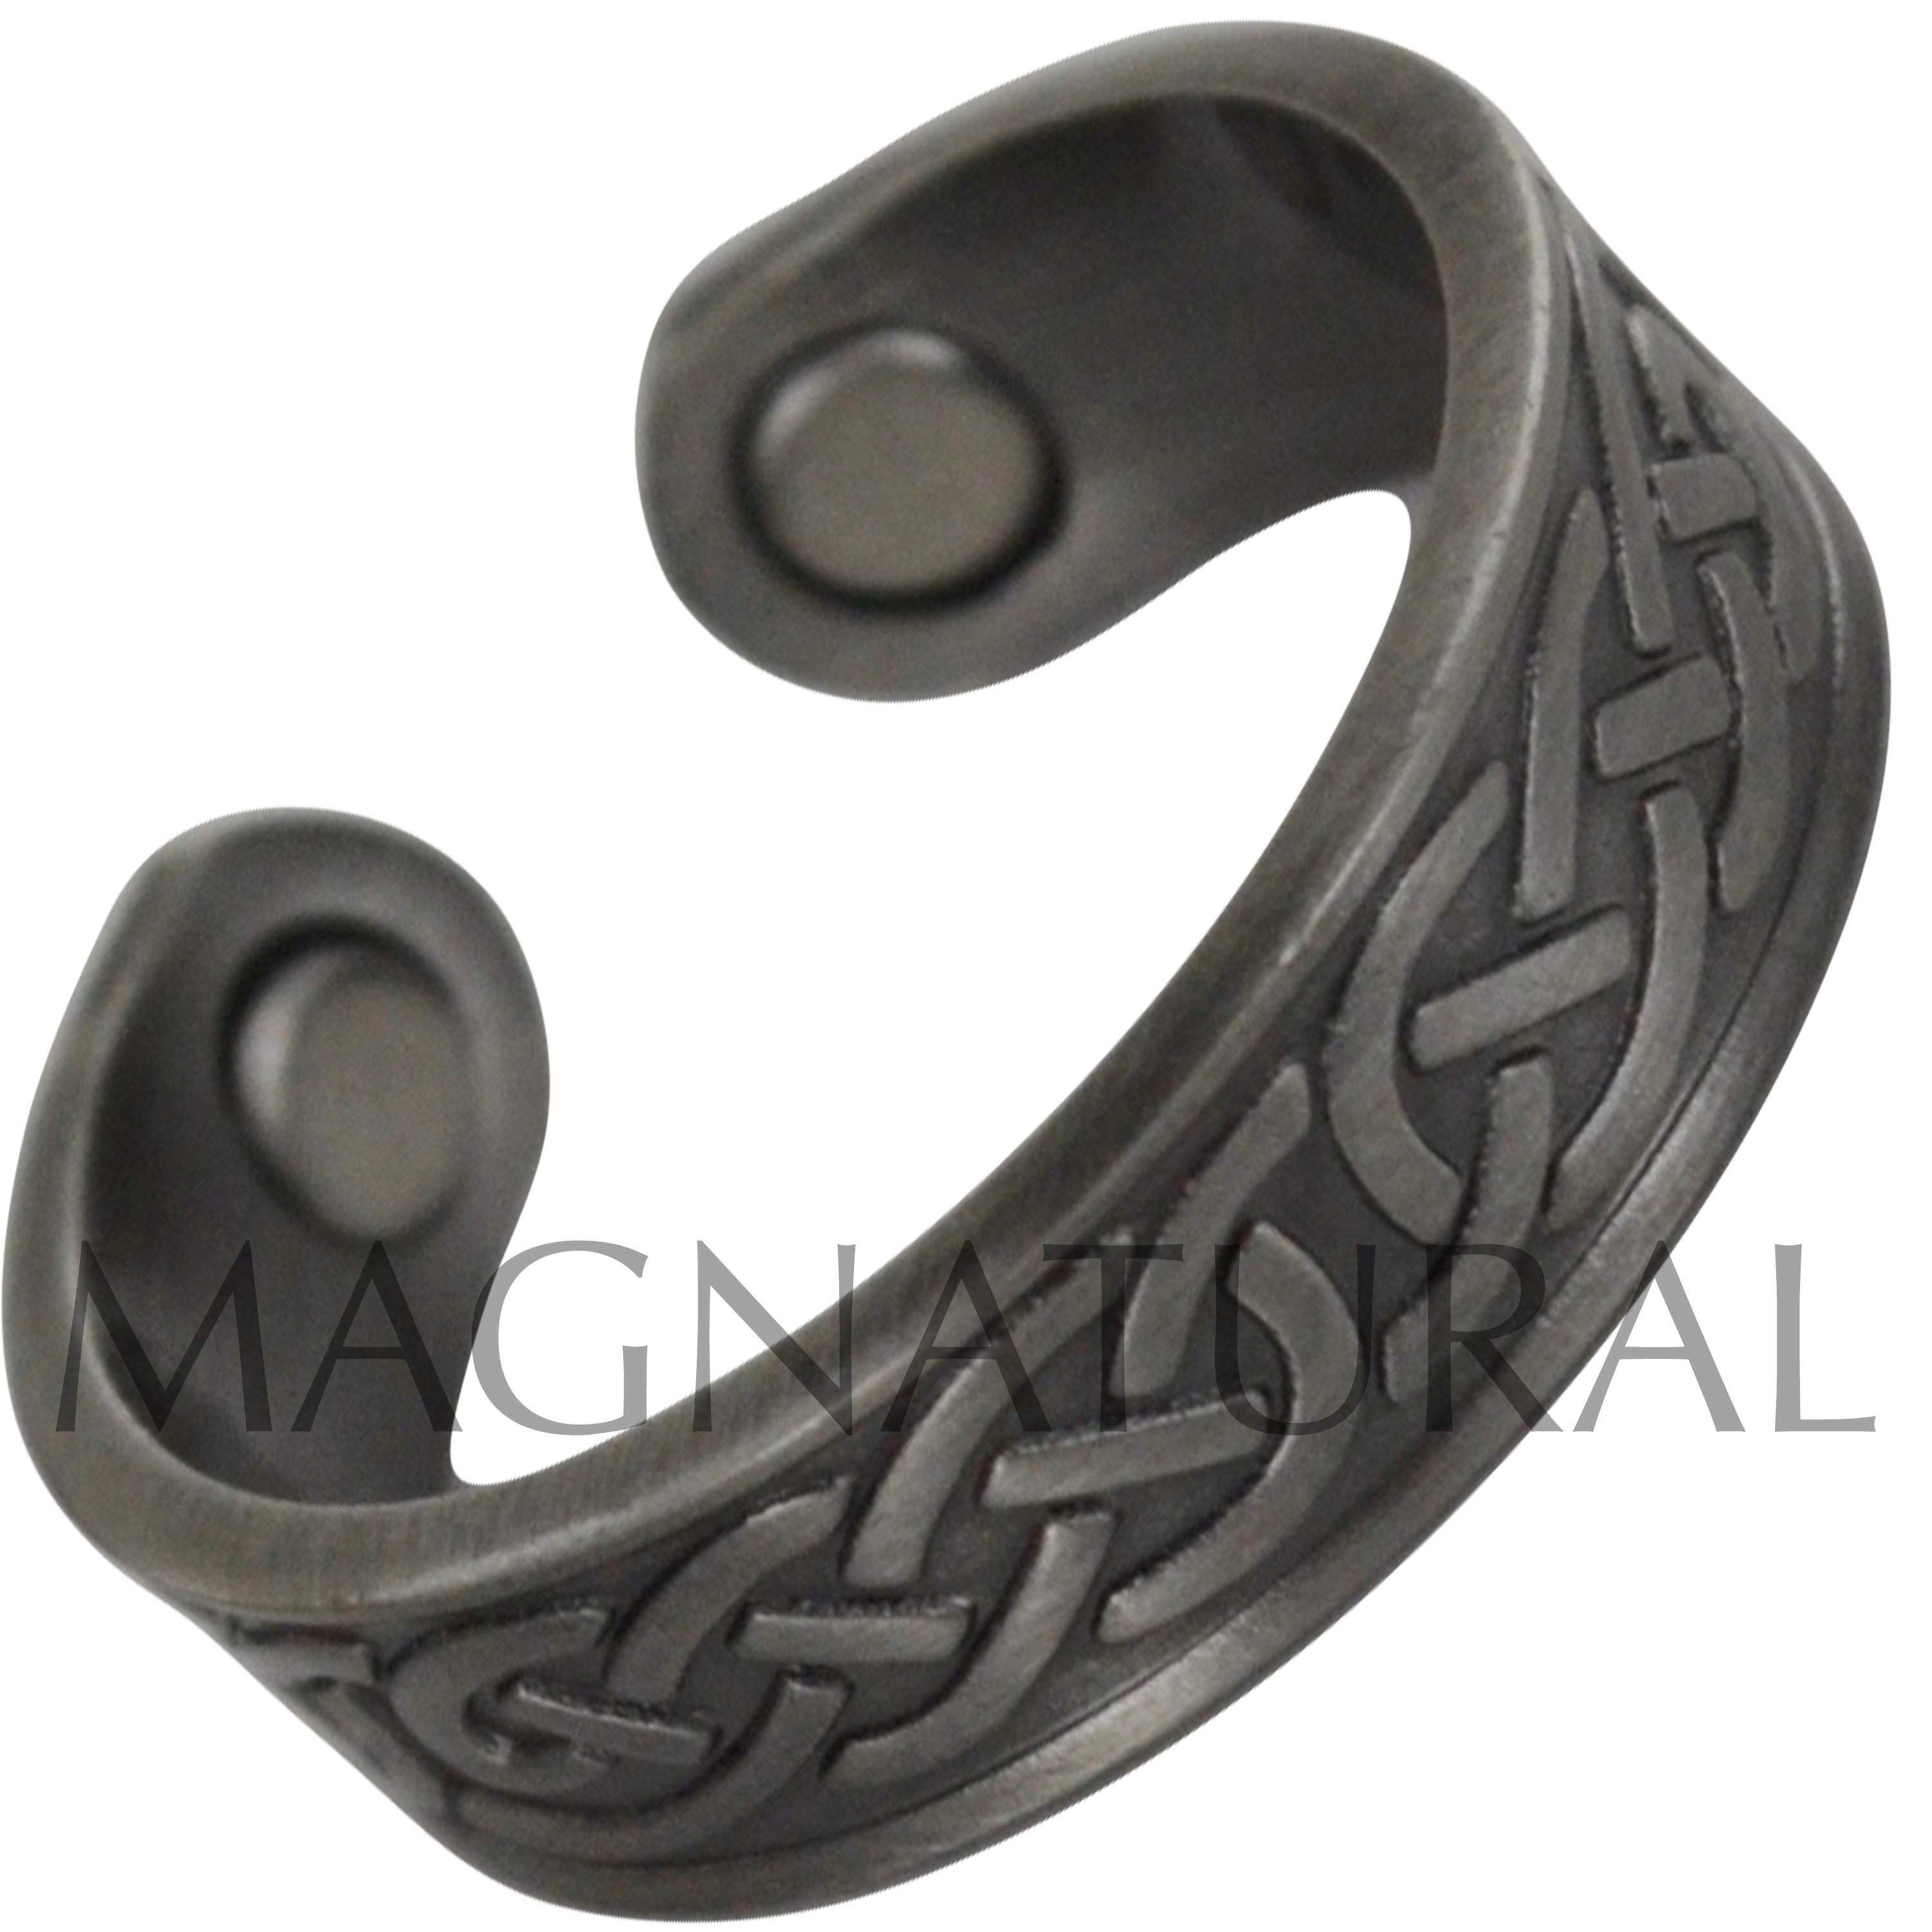 Magnetic Copper Ring - Pewter Knot